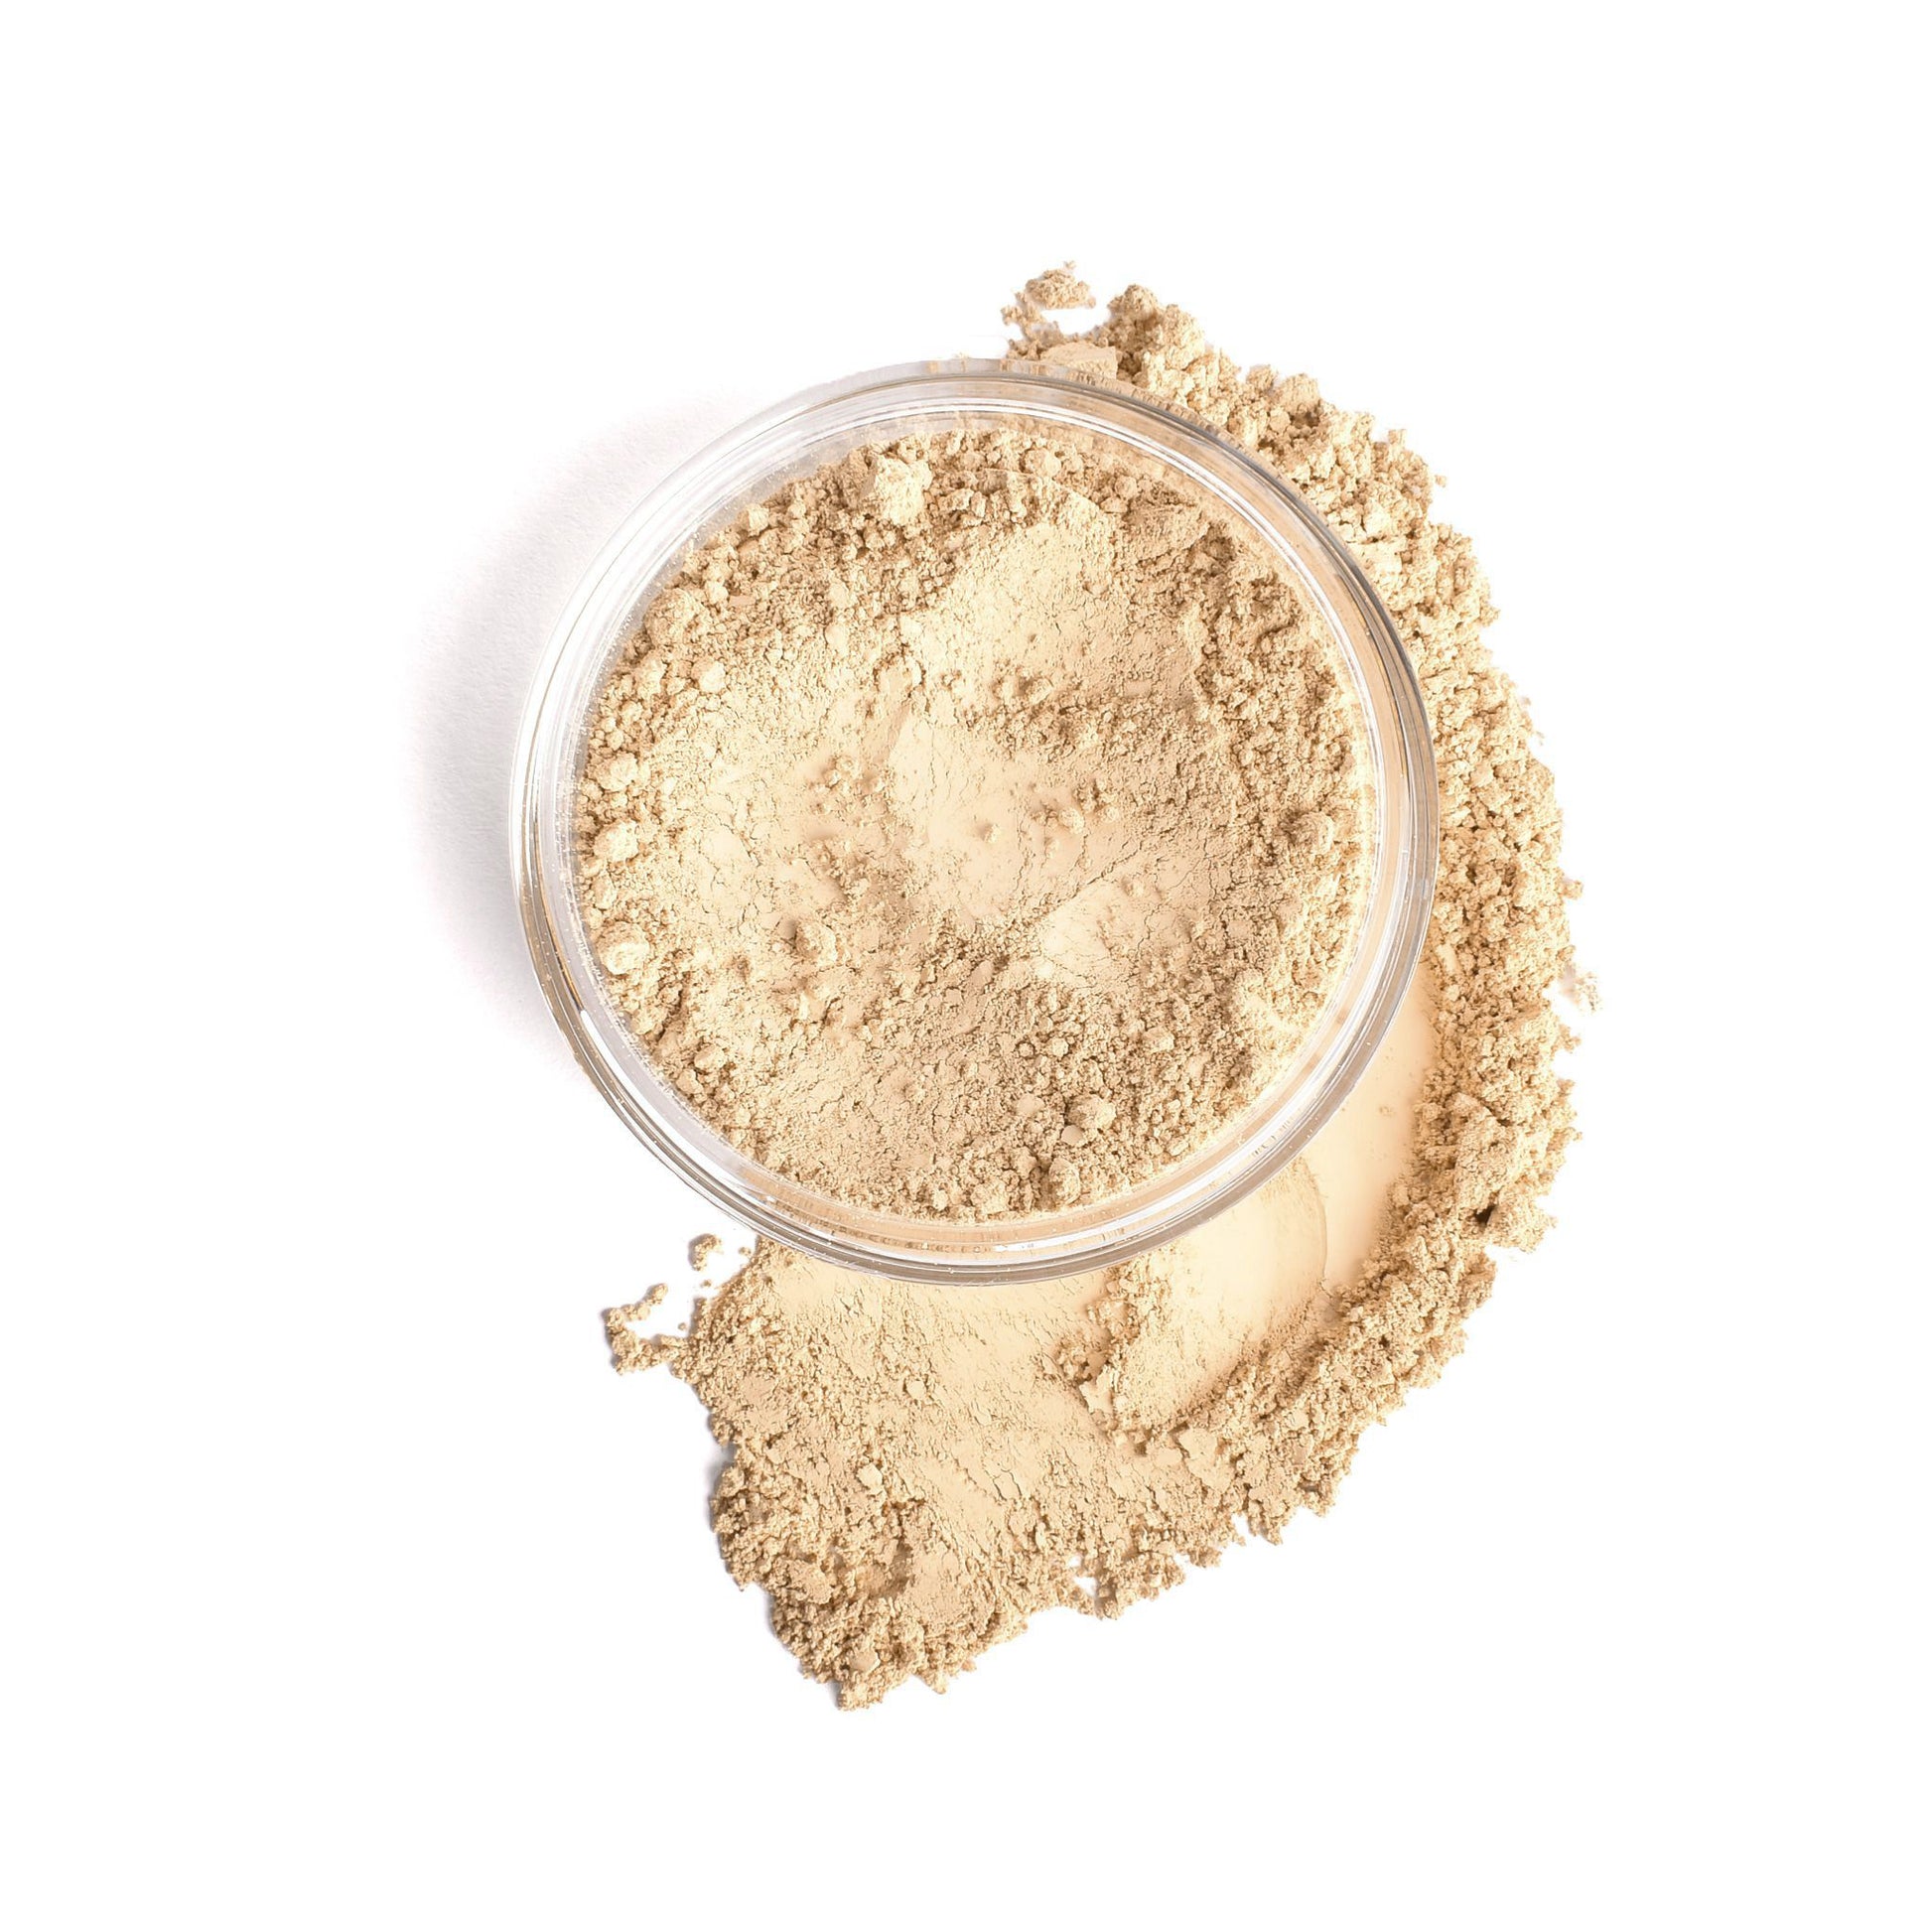 loose-mineral-foundation-container-for-normal-skin-makeup